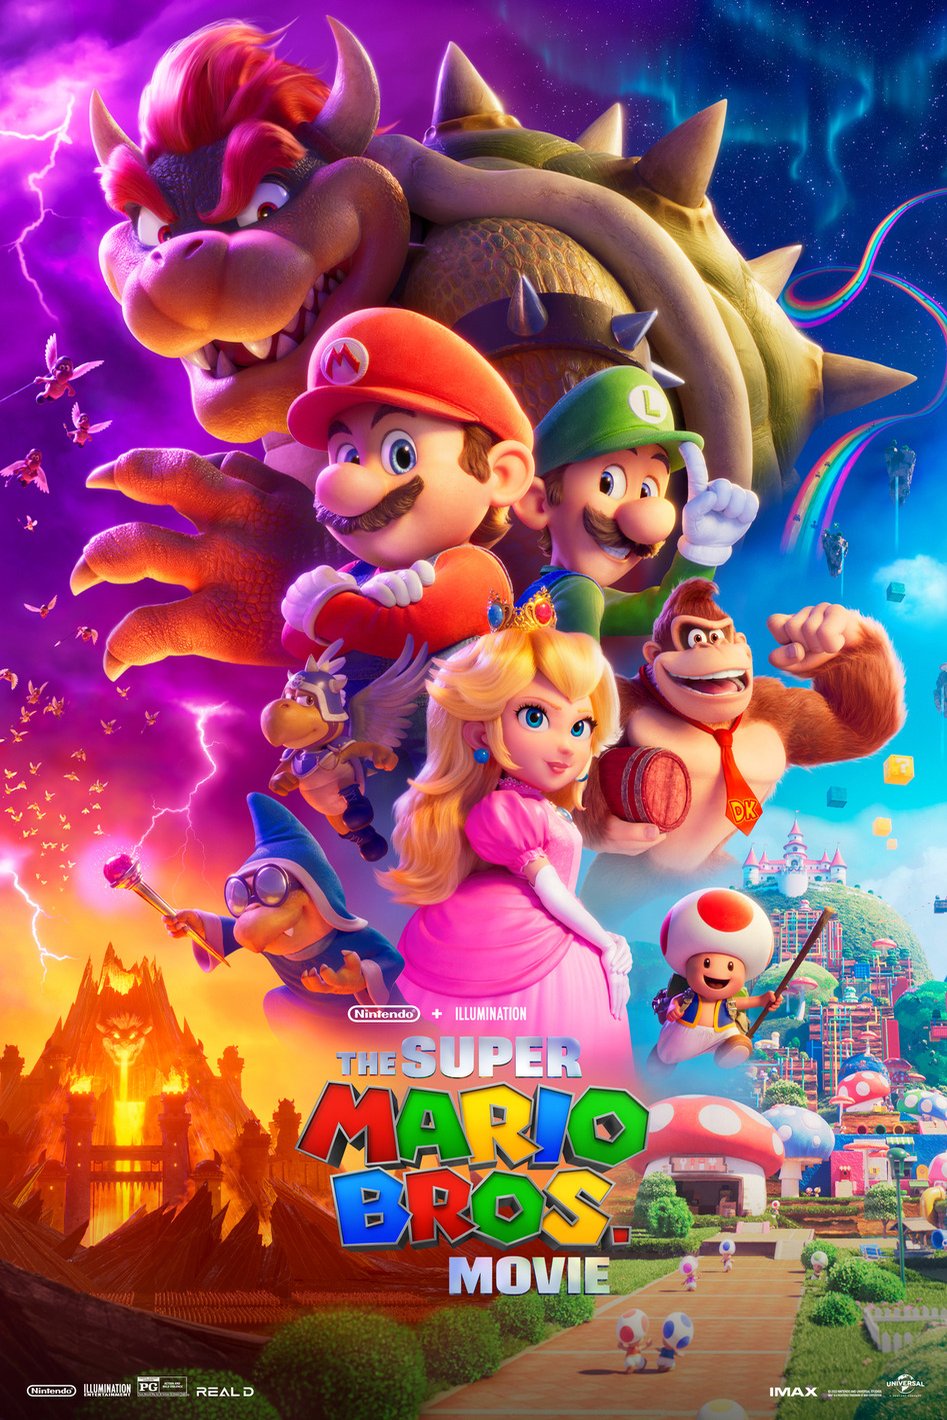 Super Mario Bros The Movie (2023) by Aaron Horvath, Michael Jelenic